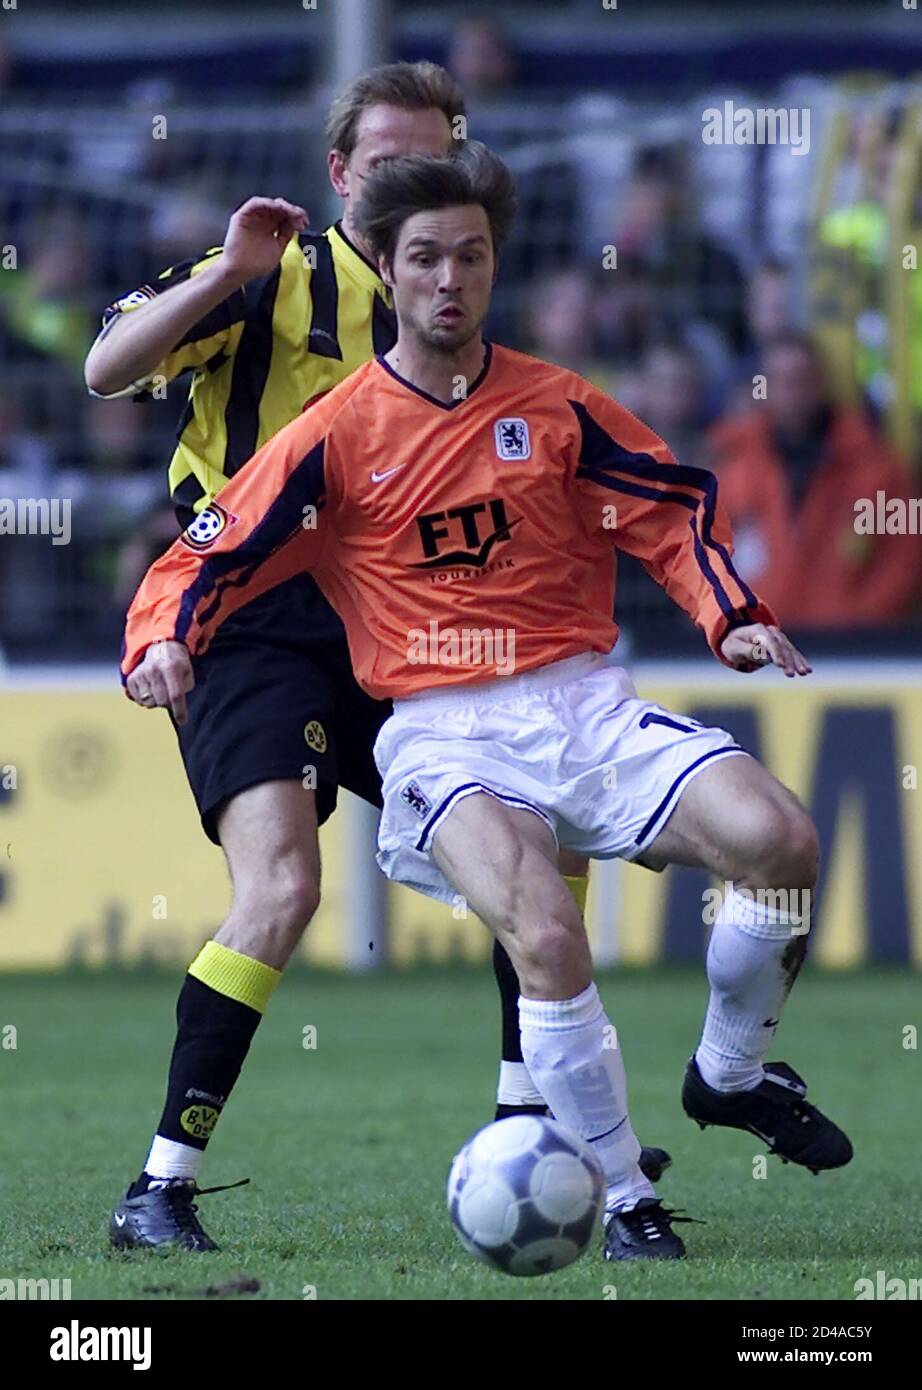 Borussia Dortmund's Joerg Heinrich (L) tackles 1860 Munich's Austrian Harald Cerny (R) from during a German first division soccer match in Dortmund April 6, 2002. REUTERS/ Ina Fassbender  INA Stock Photo